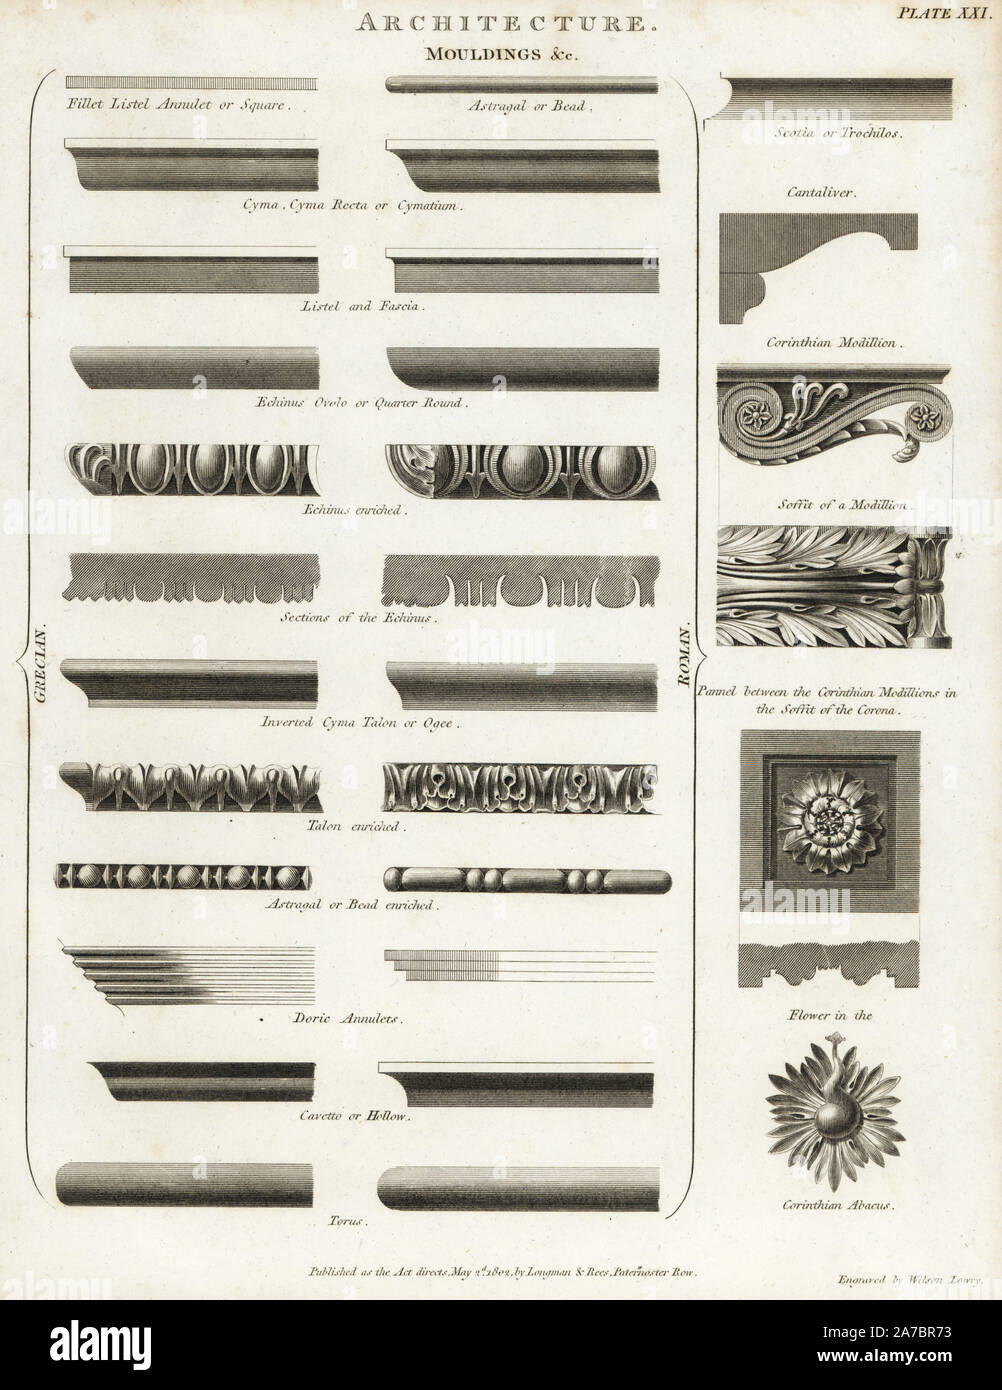 Grecian and Roman architectural mouldings. Greek fillet listel annulet, cyma recta, fascia, echinus ovolo, talon enriched, astragal, Doric, cavetto and torus, and Roman Scotia, cantaliver and Corinthian modillion. Copperplate engraving by Wilson Lowry from Abraham Rees' Cyclopedia or Universal Dictionary of Arts, Sciences and Literature, Longman, Hurst, Rees, Orme and Brown, London, 1820. Stock Photo